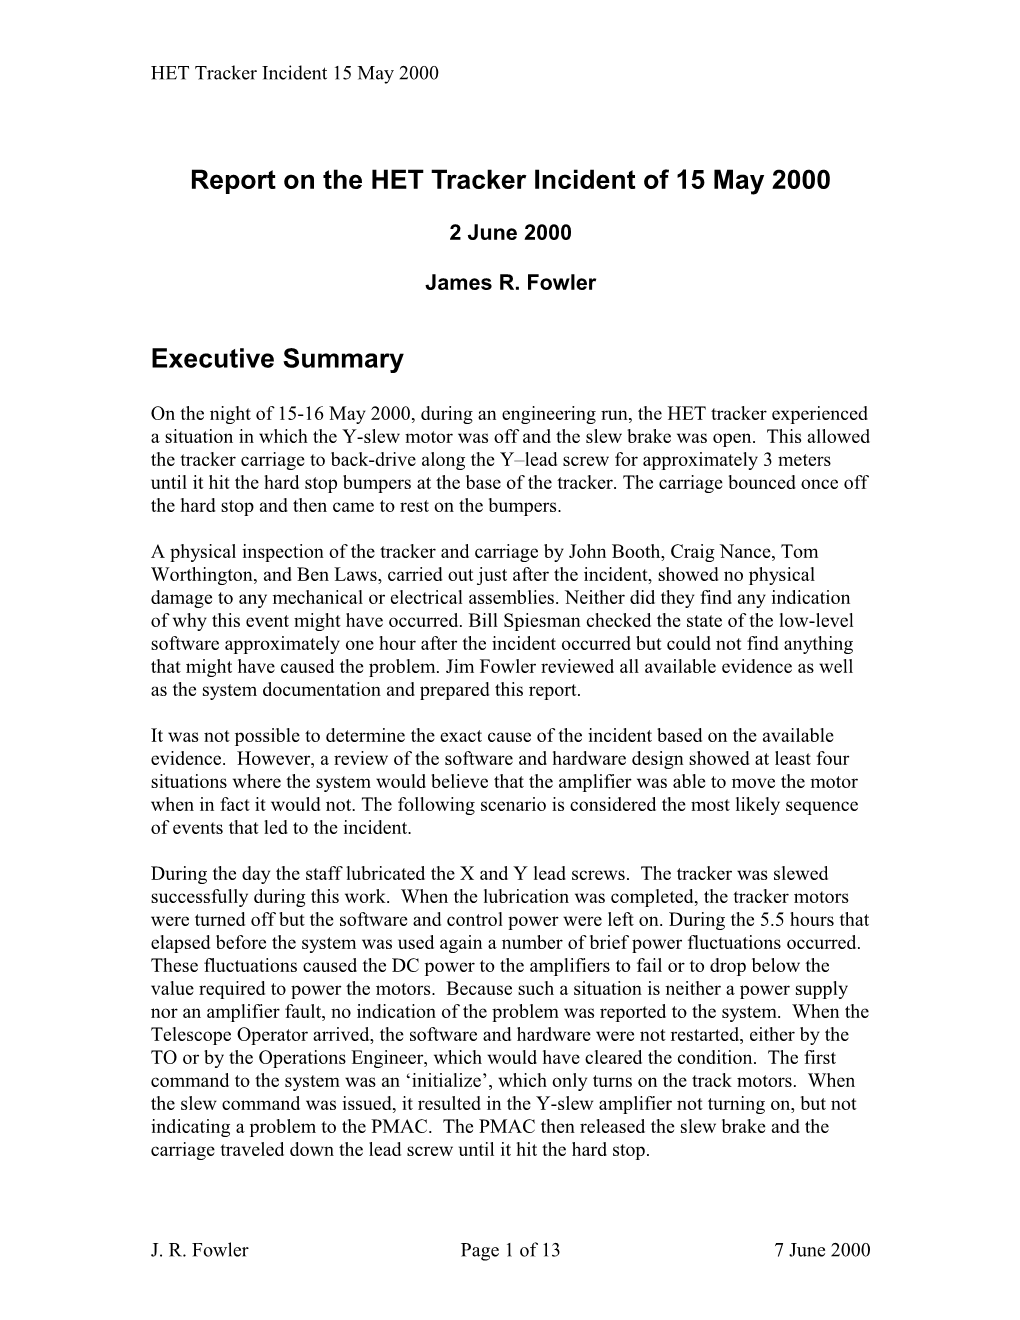 Report on the HET Tracker Crash of 15 May 2000